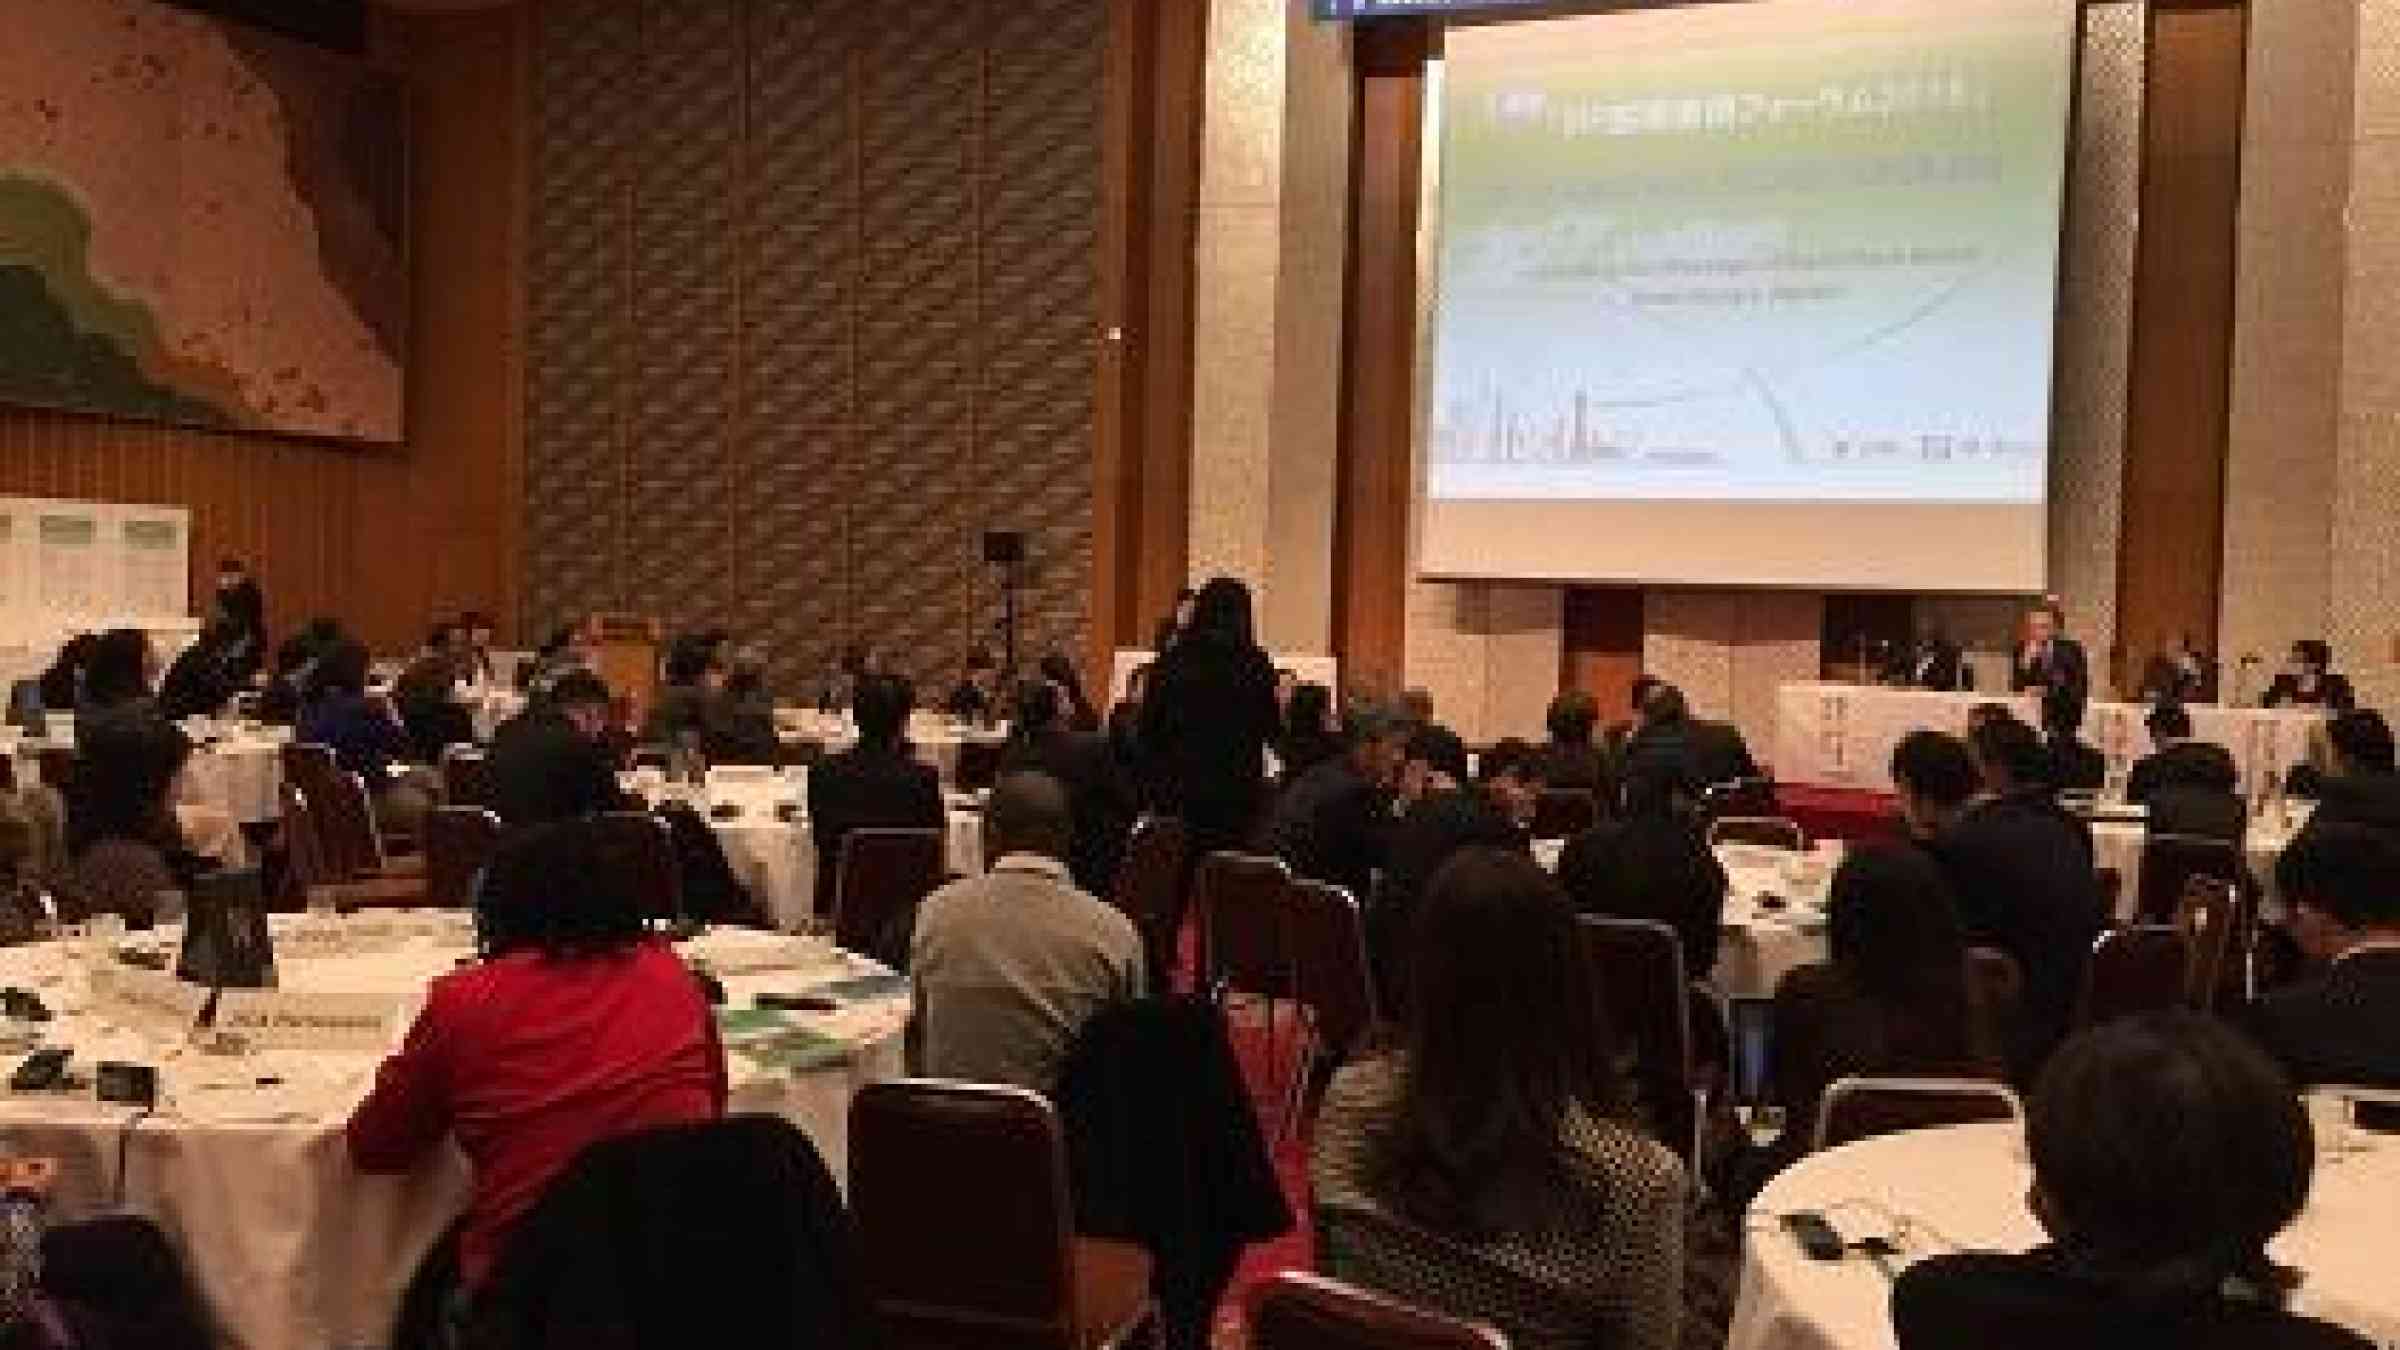 The annual International Recovery Forum took place in Kobe, Japan